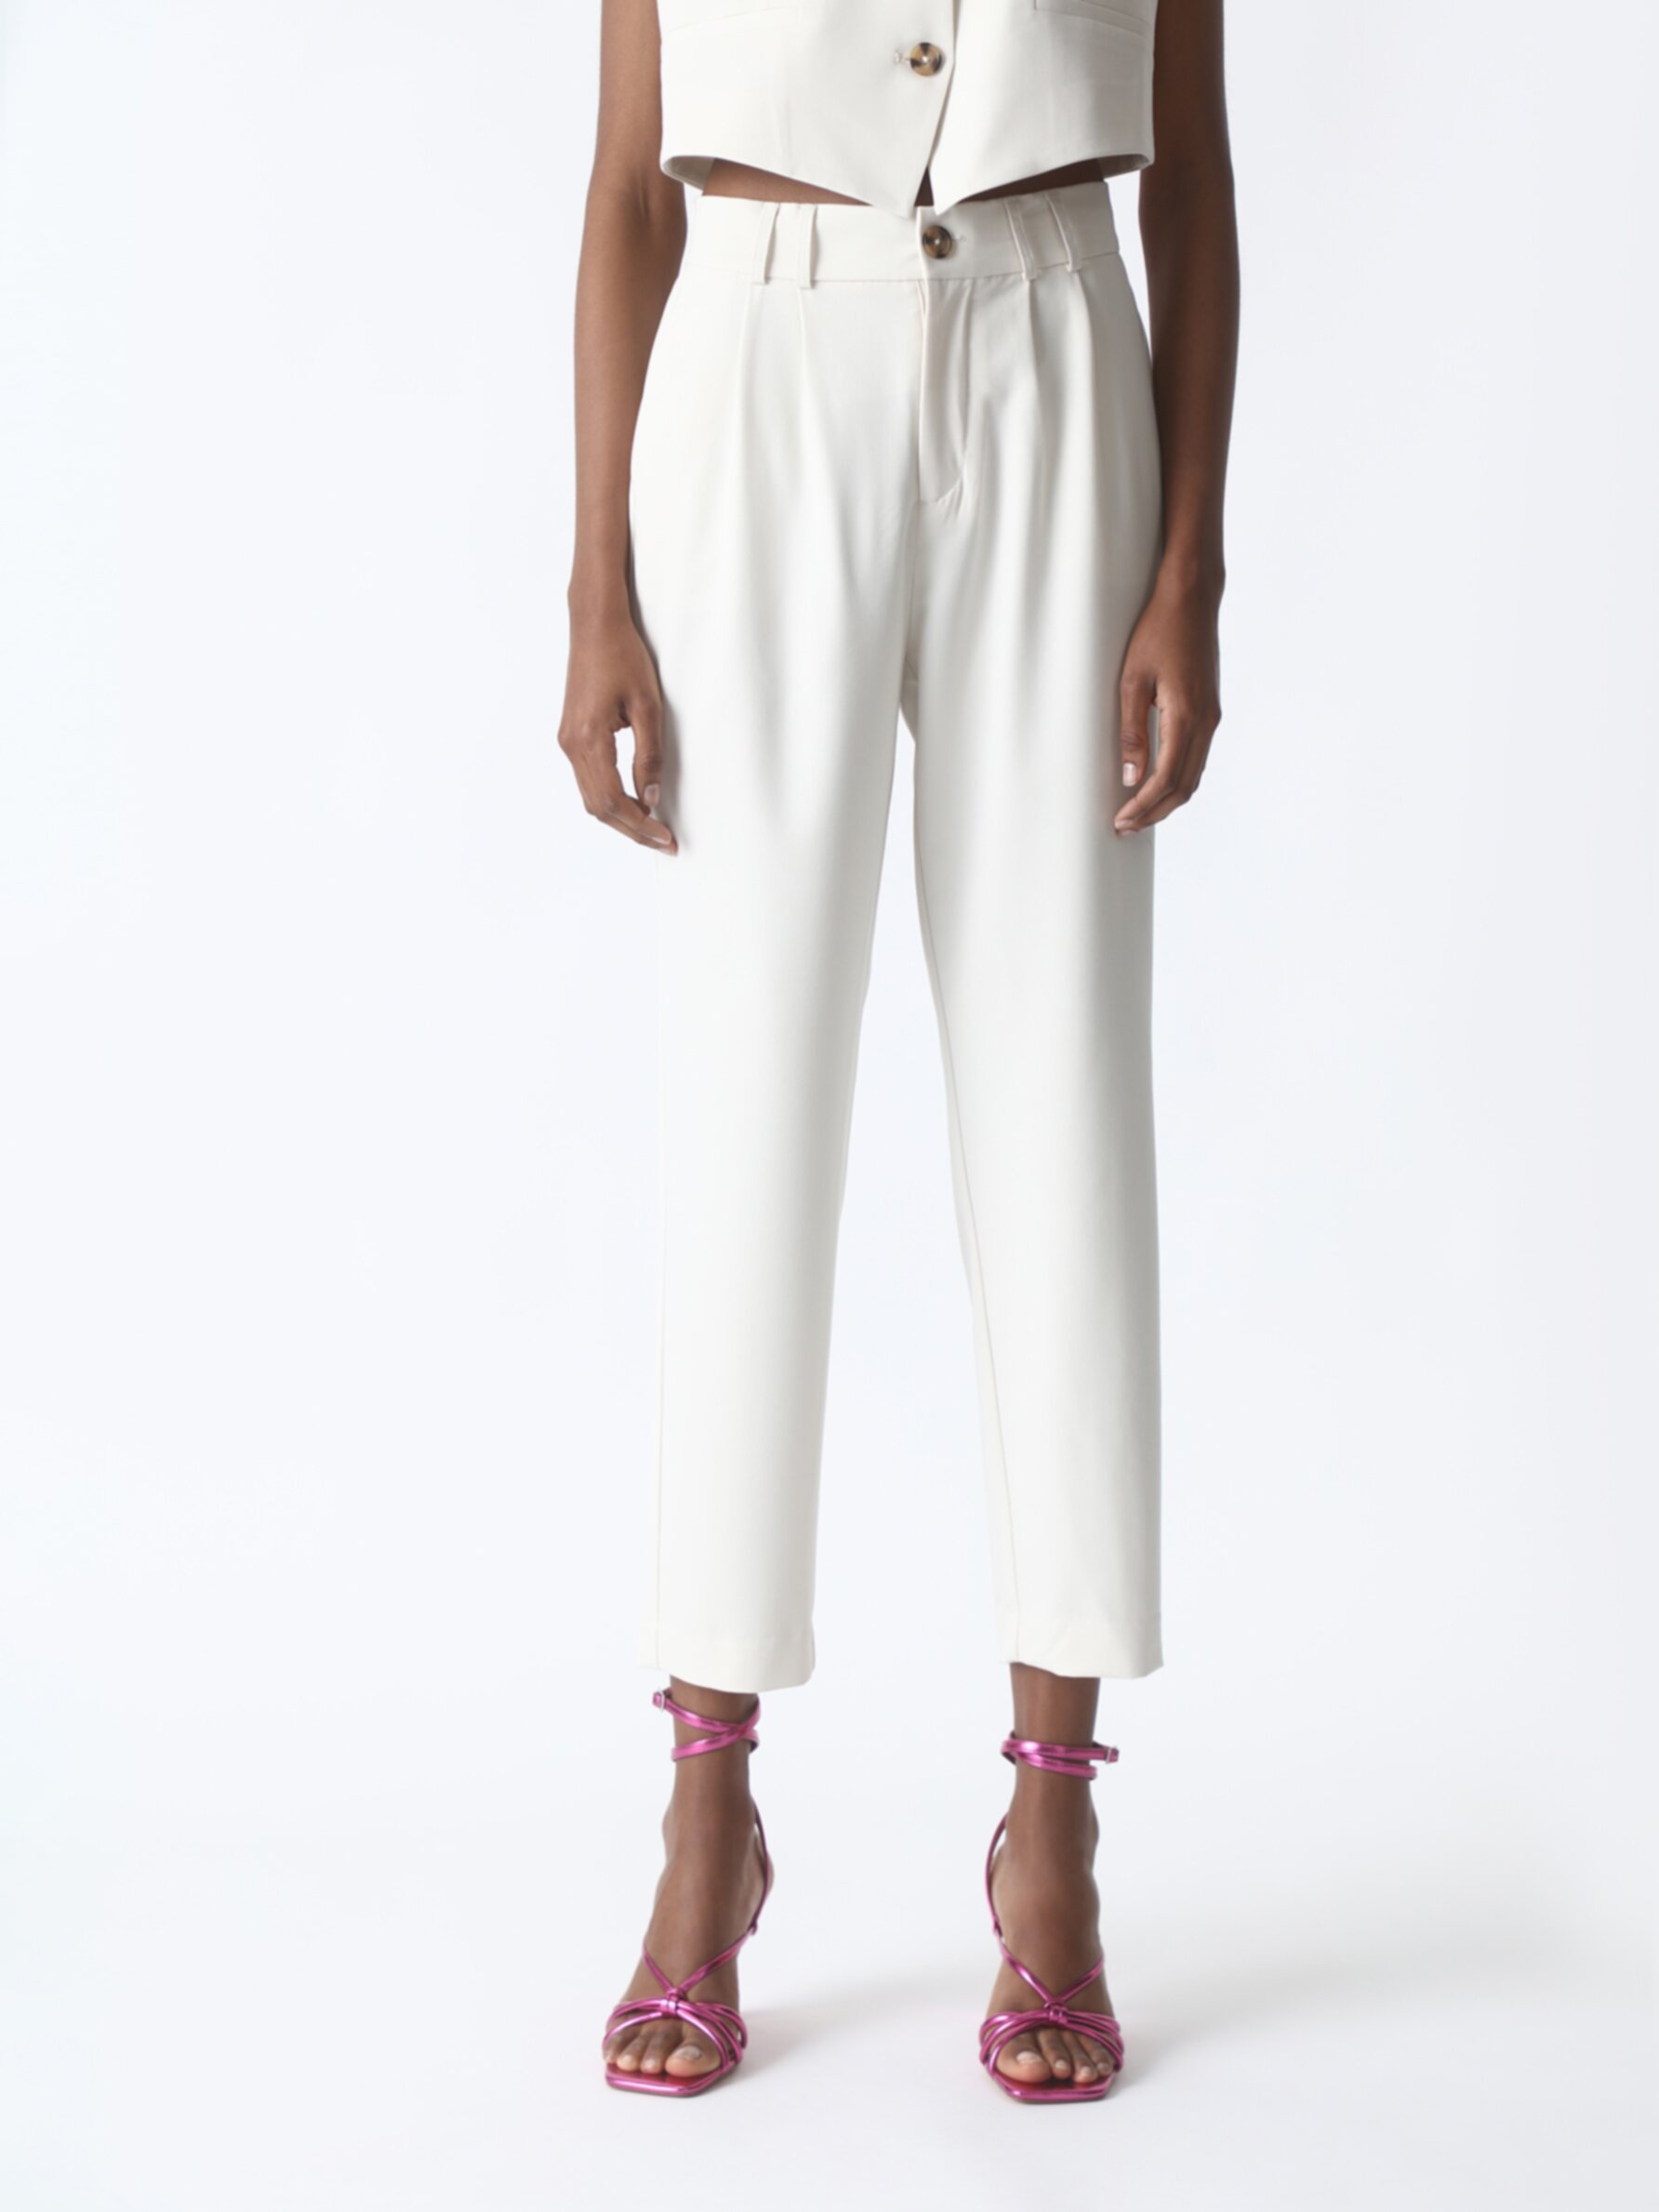 suggest better quality beige/off-white trousers : r/IndianFashionAddicts